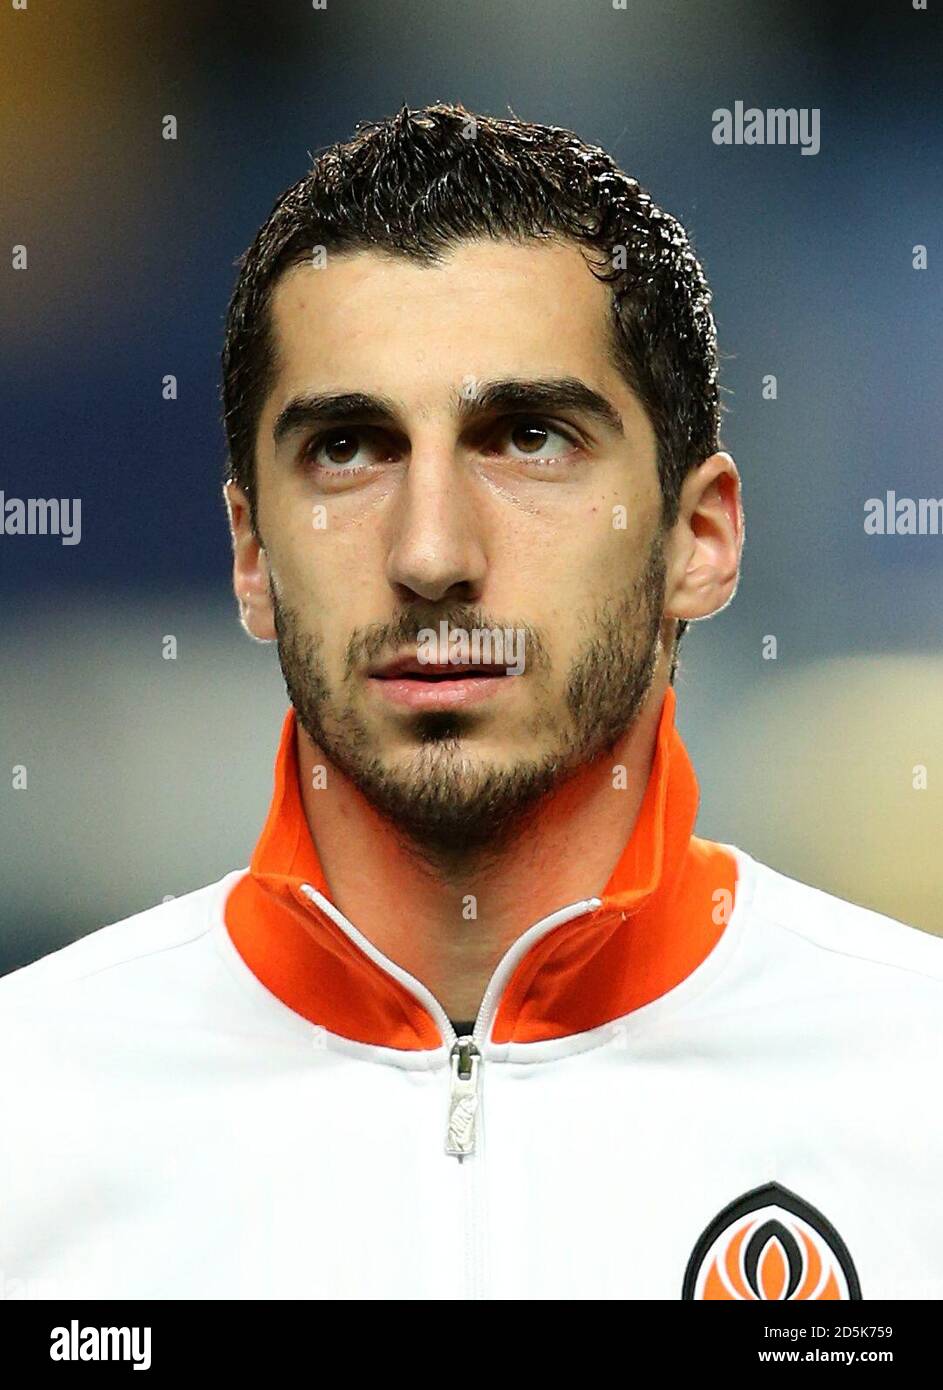 Mkhitaryan is not only Shakhtar's best player